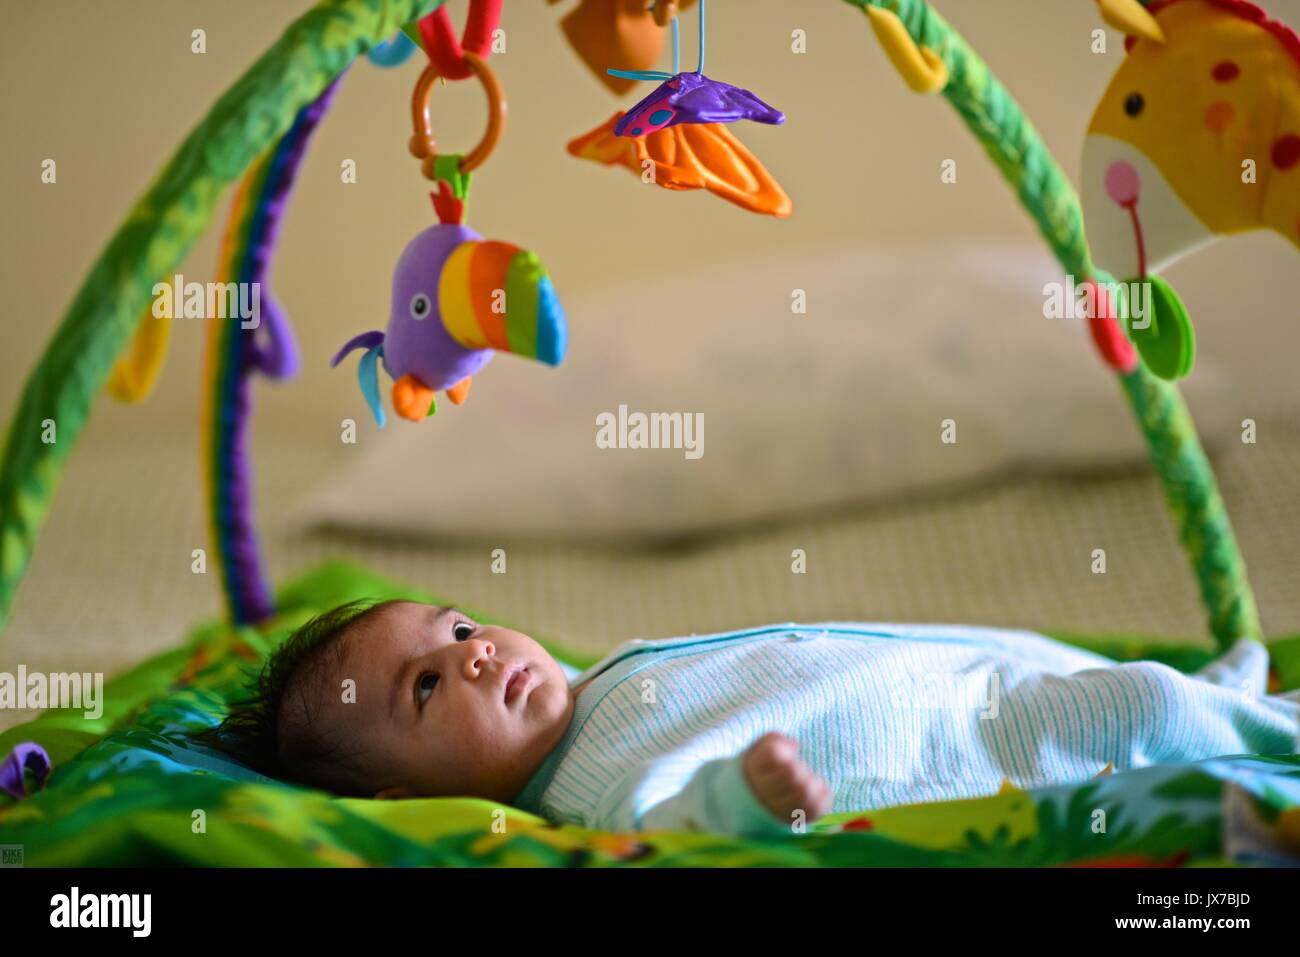 A seven-week-old baby girl exploring her senses at a baby gym. Stock Photo